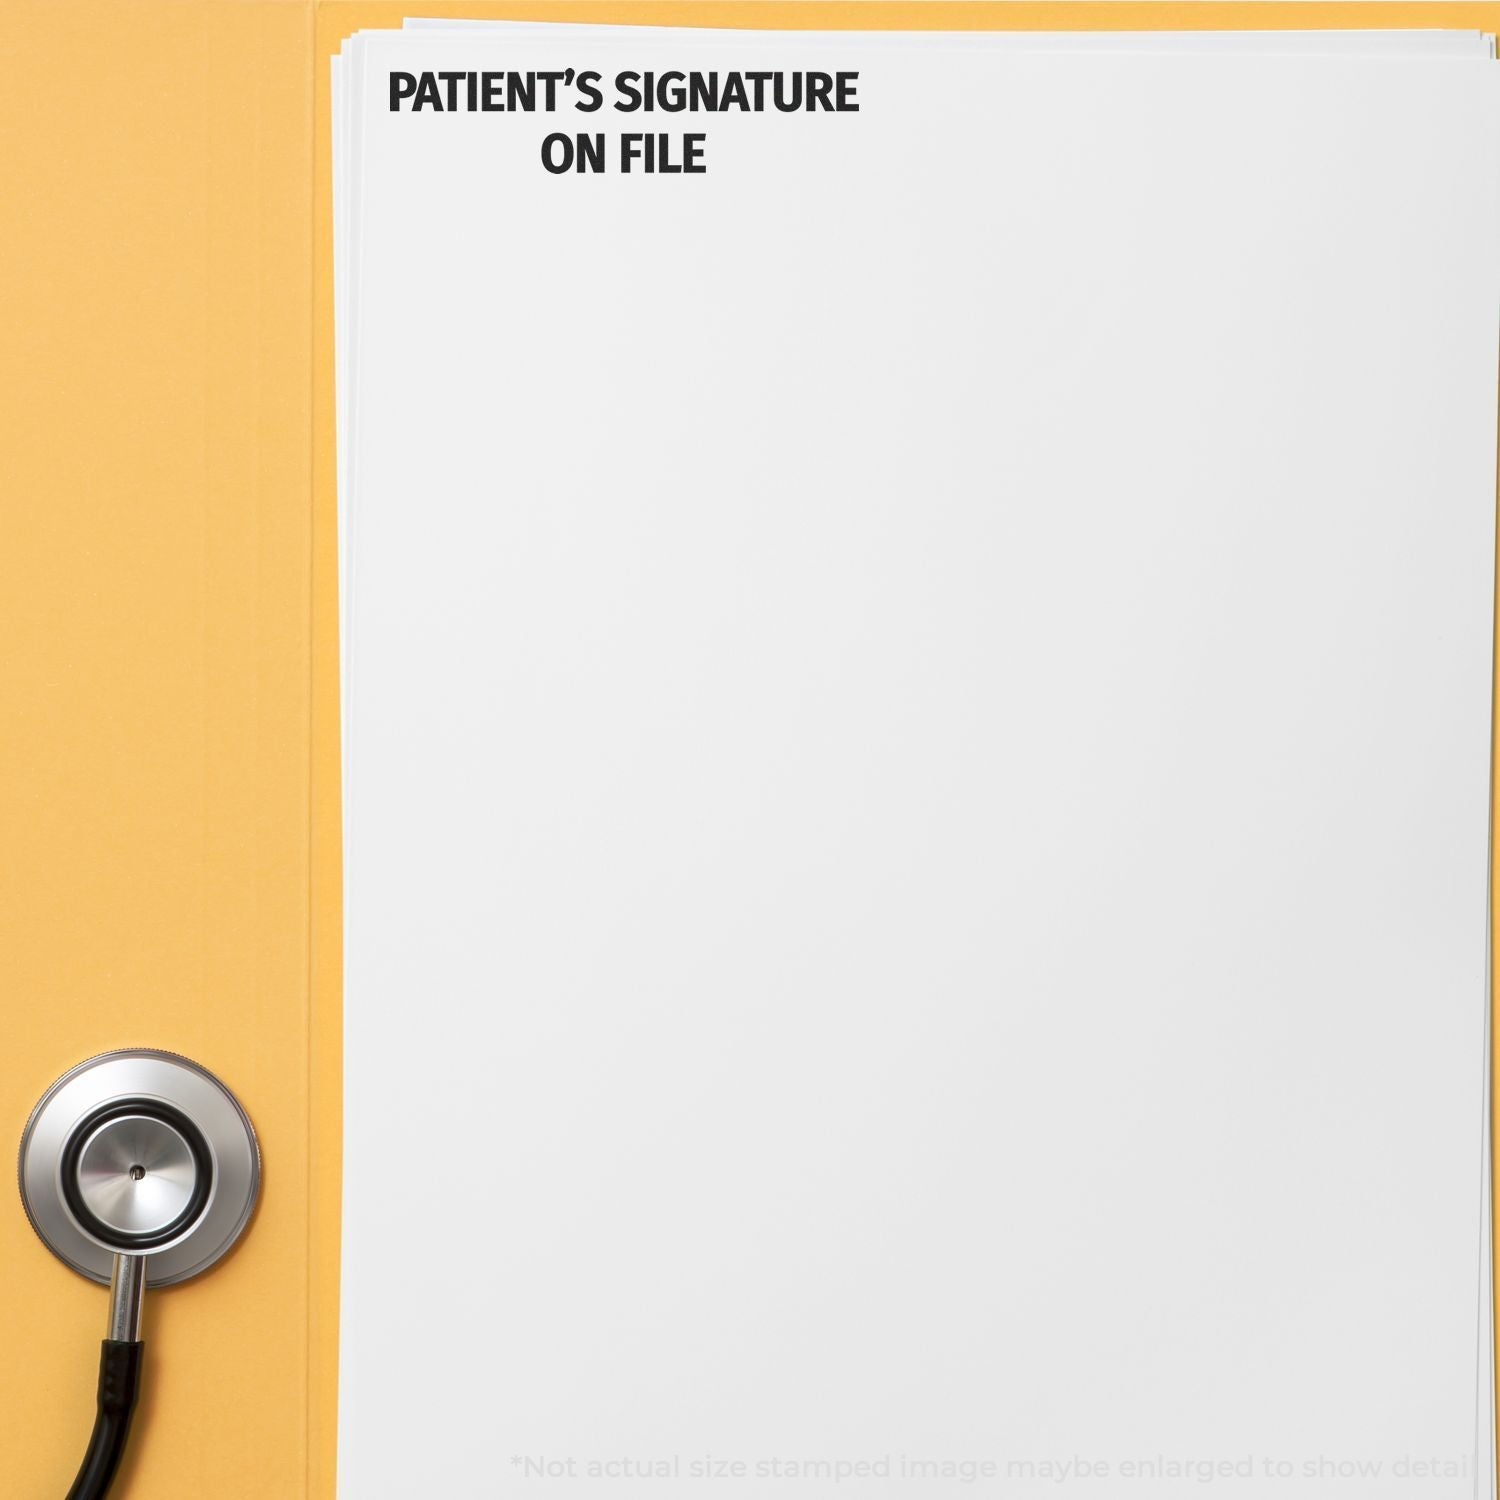 A self-inking stamp with a stamped image showing how the text "PATIENT'S SIGNATURE ON FILE" is displayed after stamping.